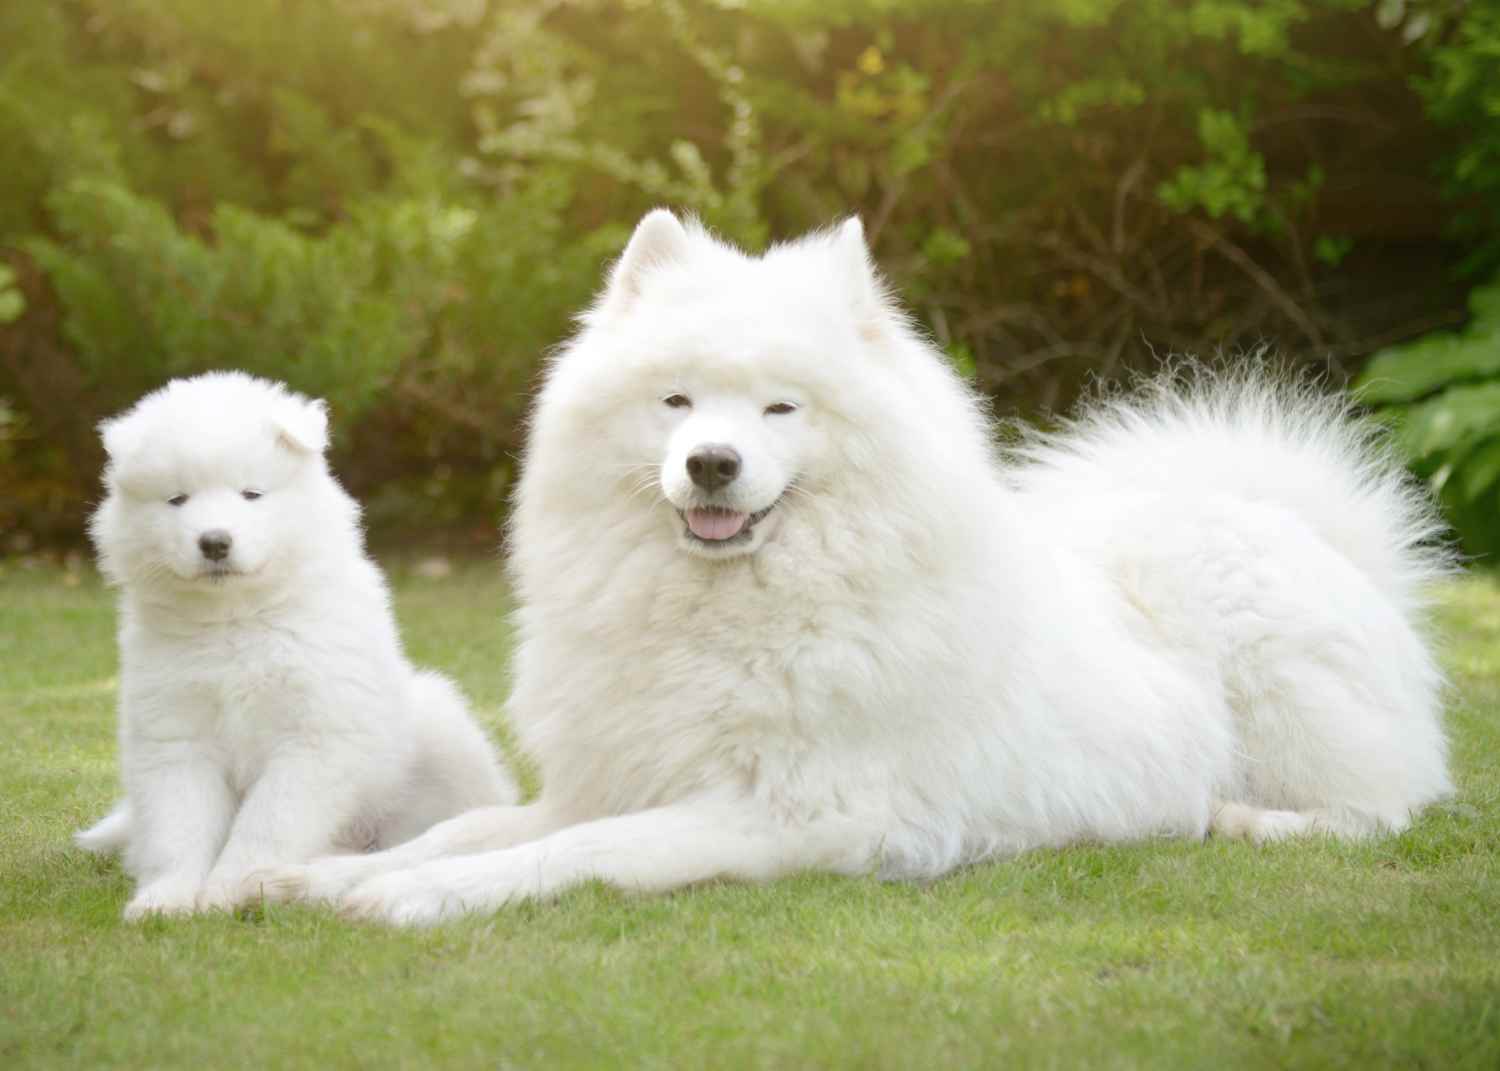 A Samoyed puppy and adult lie on the grass in the sunshine